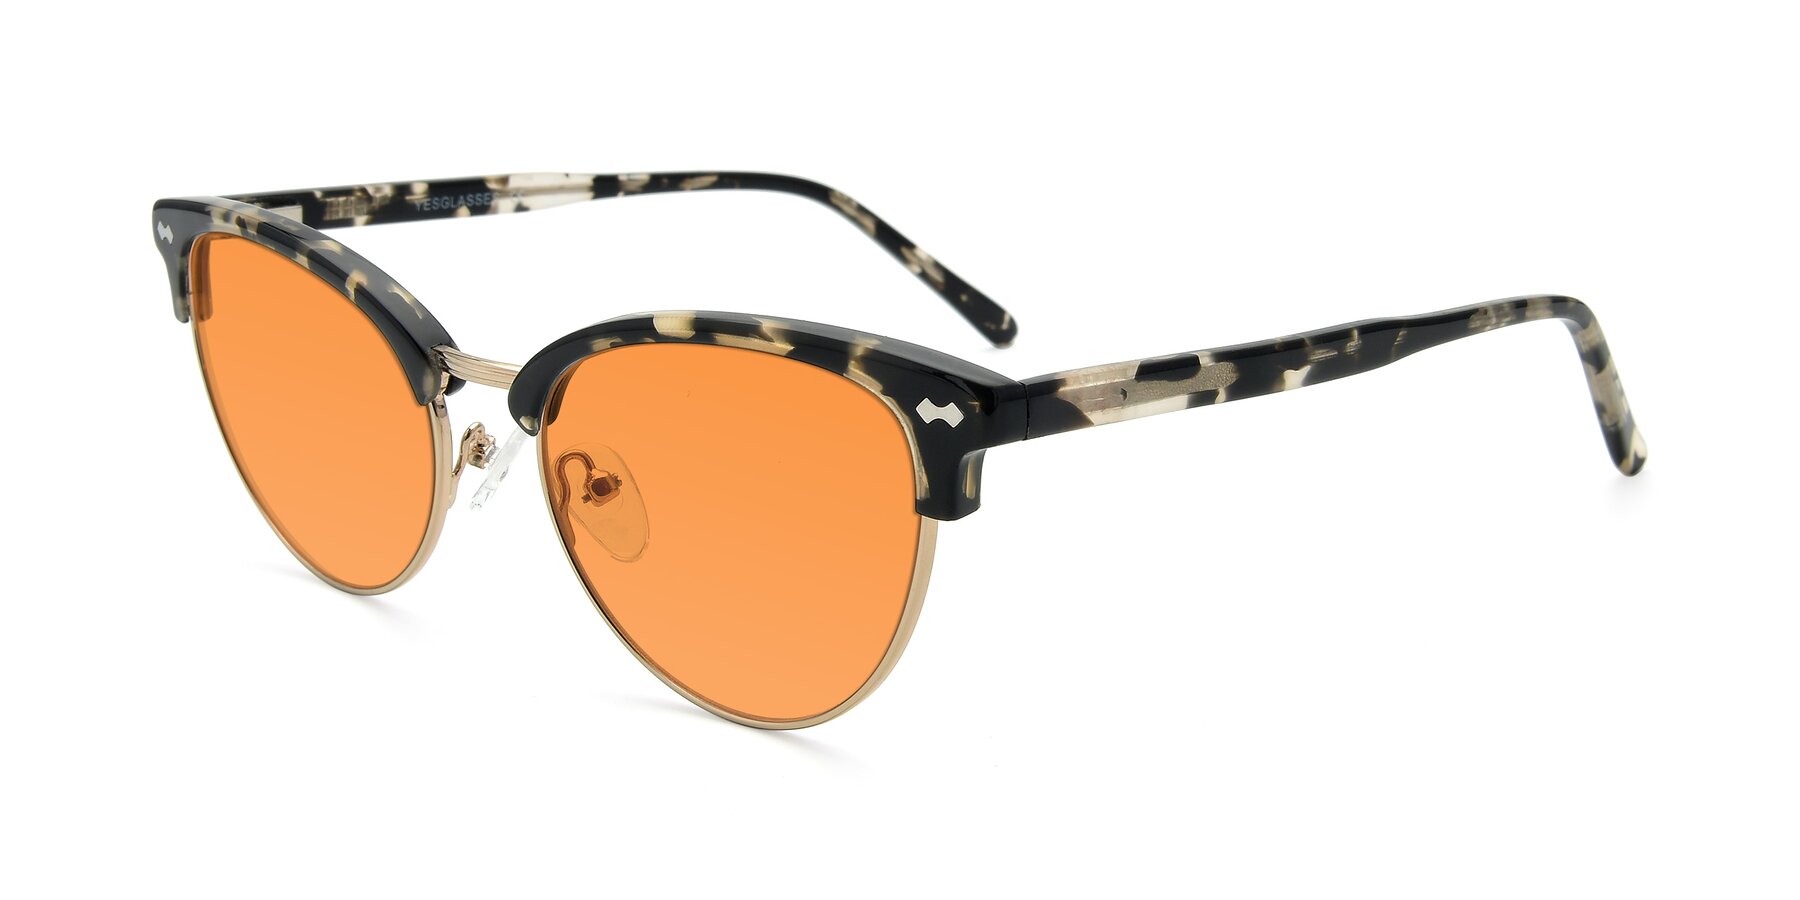 Angle of 17461 in Tortoise-Gold with Orange Tinted Lenses